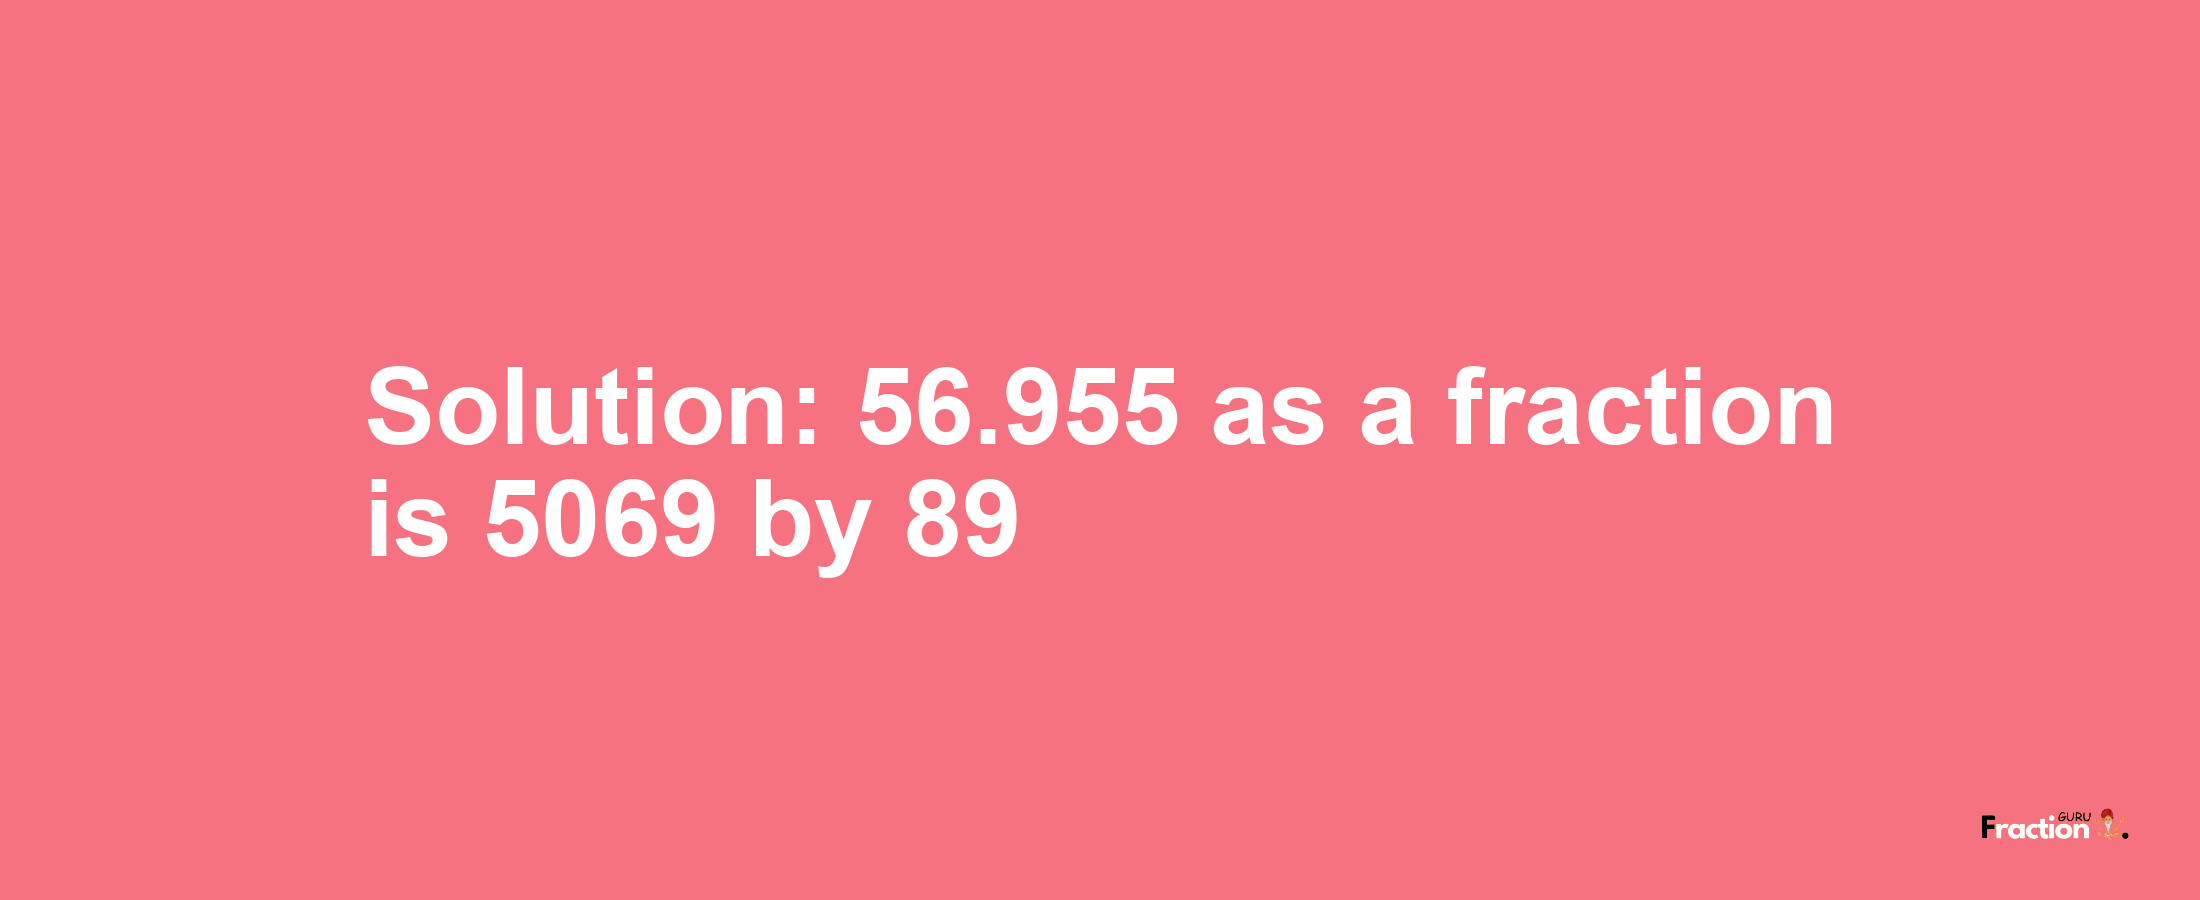 Solution:56.955 as a fraction is 5069/89